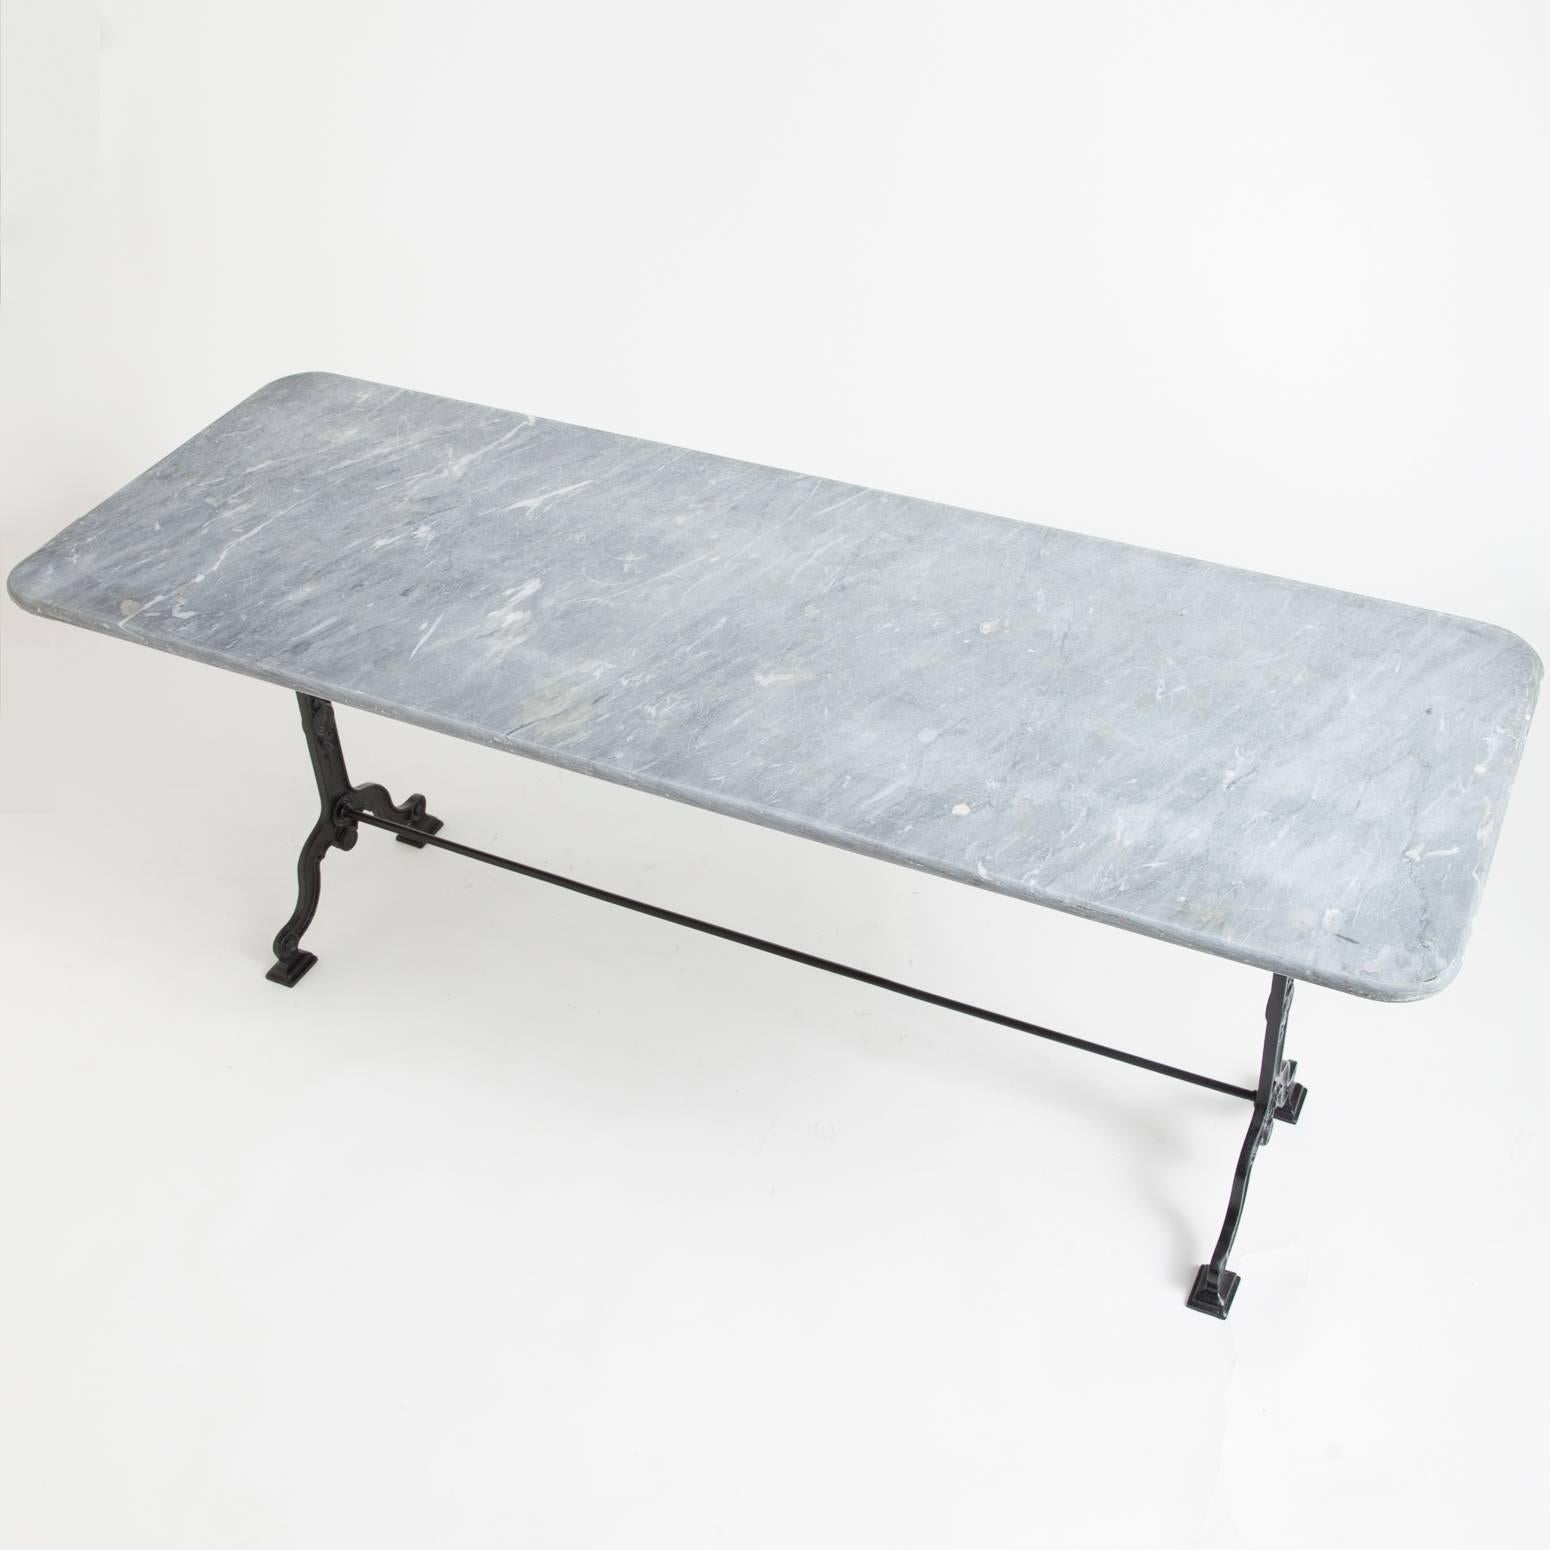 20th Century French Antique Bistro Table with Grey Marble Top, circa 1920